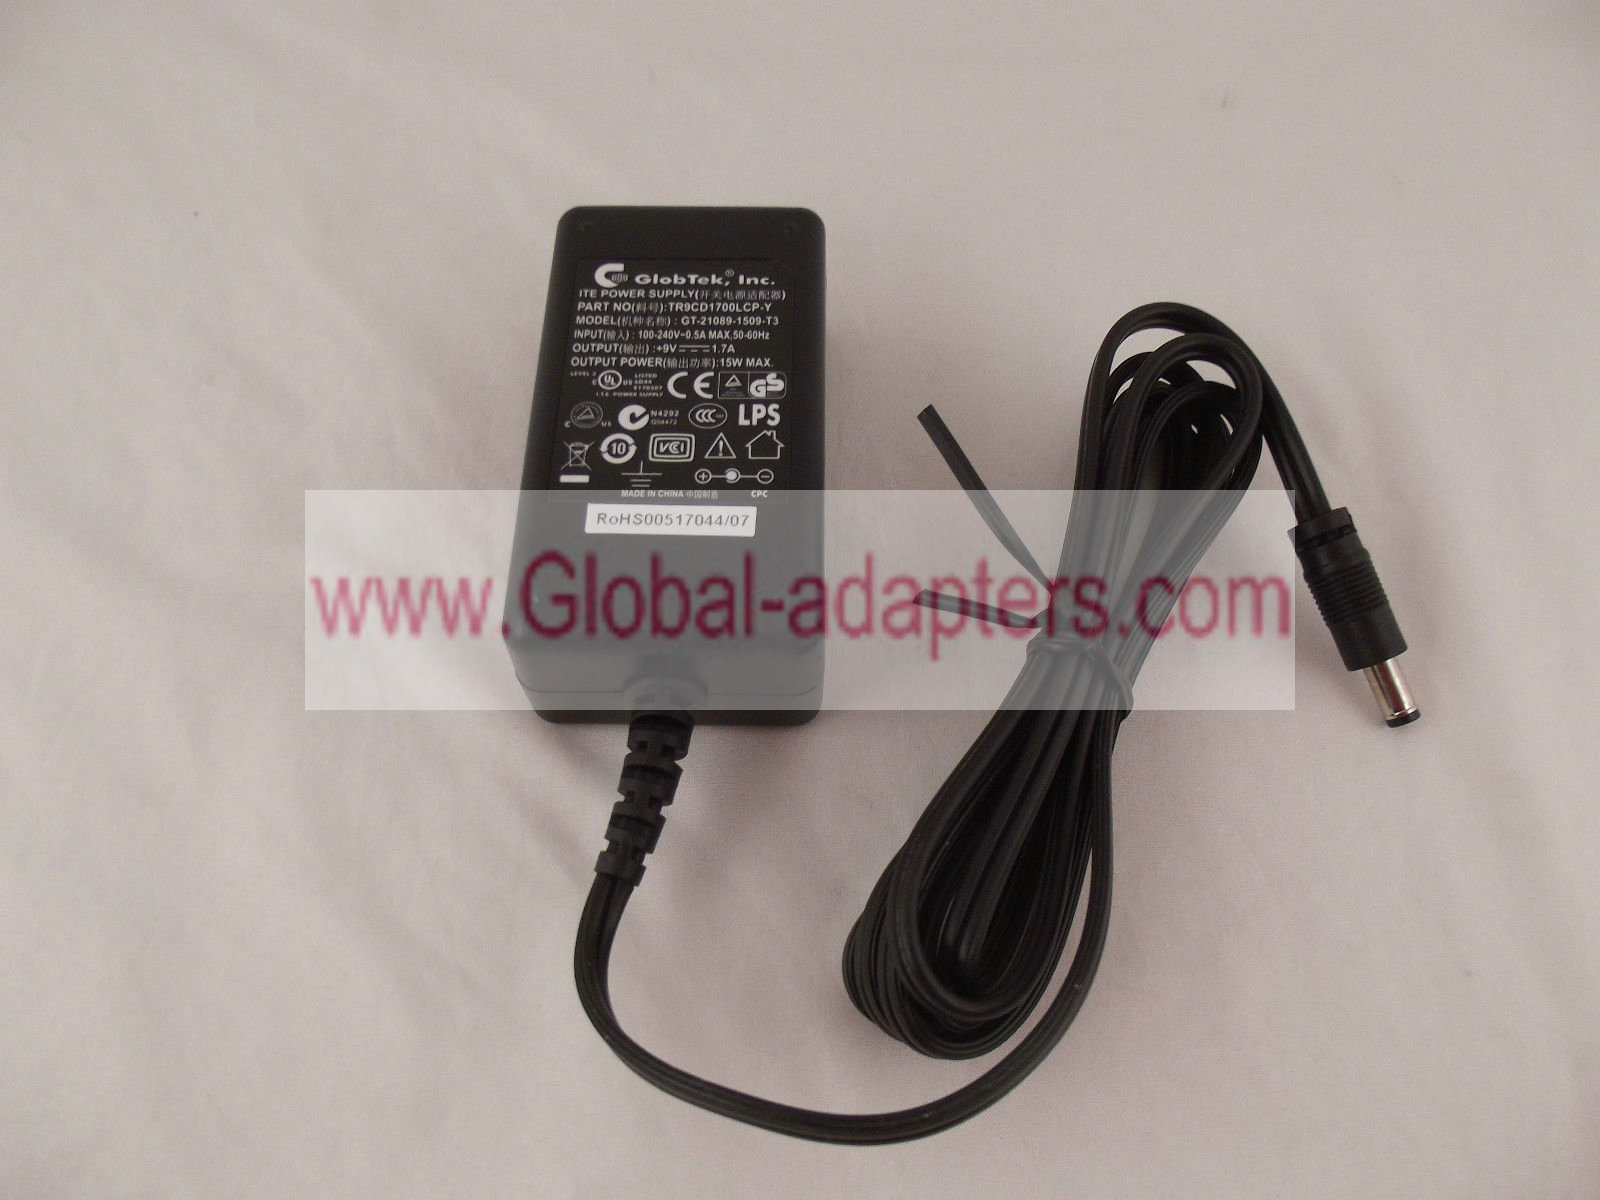 New GlobTek GT-21089-1509-T3 TR9CD1700LCP-Y 9V 1.7A ITE power supplyfor USR8004 Router